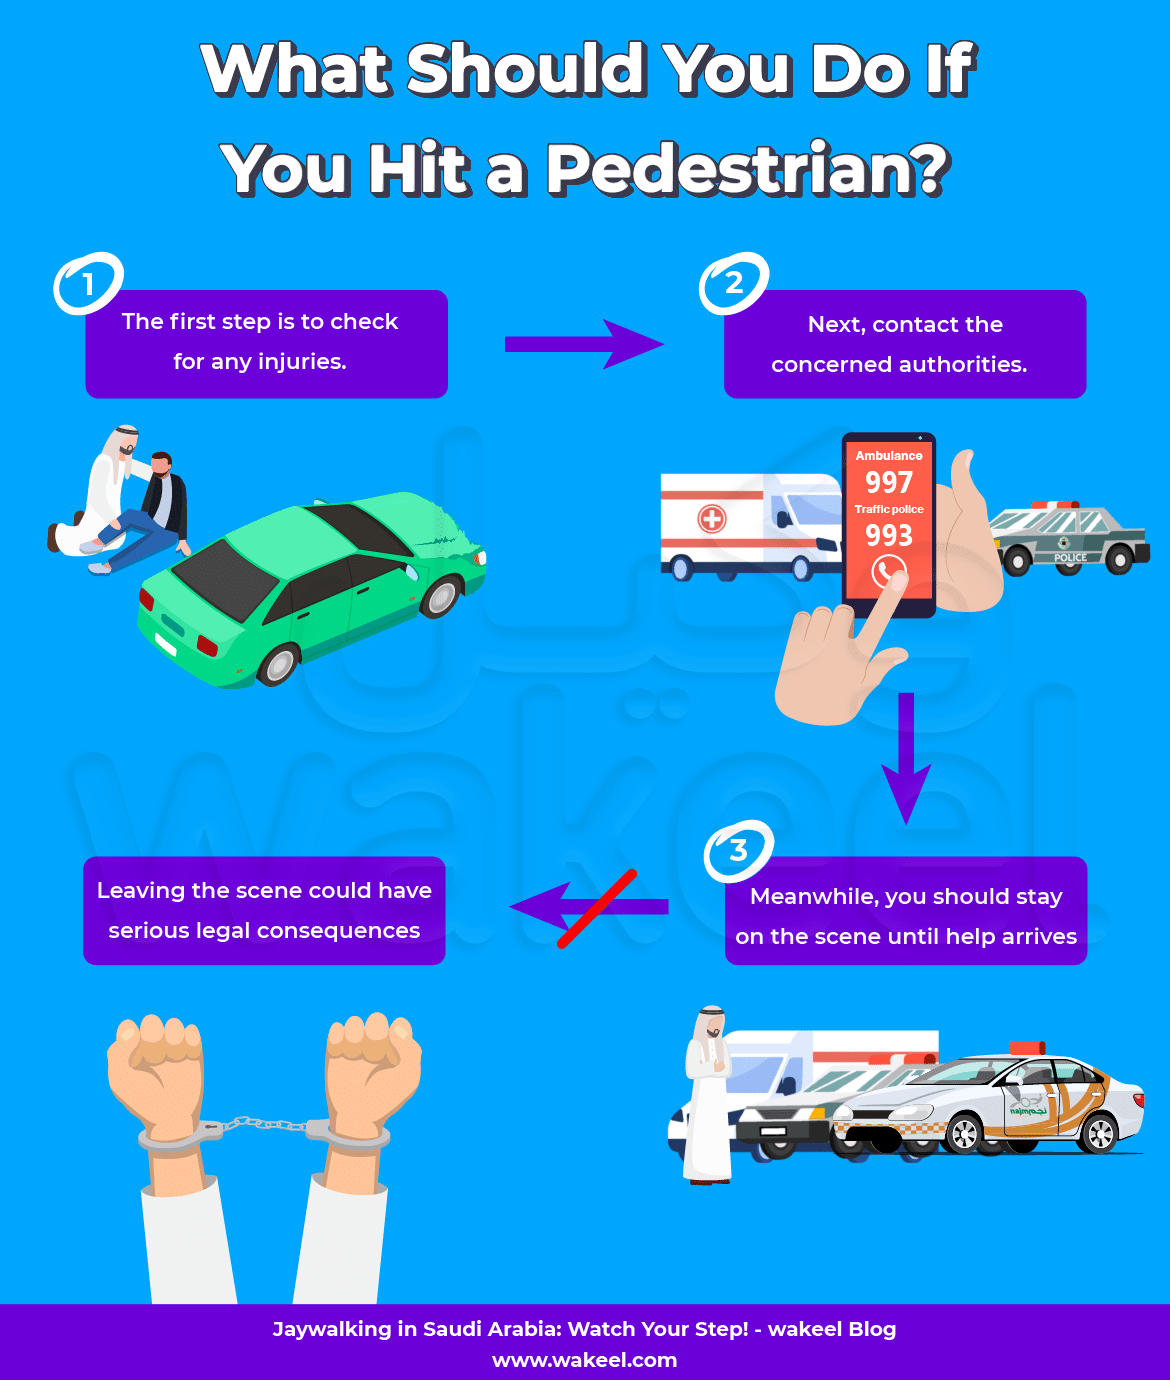 A visual guide on what to do if you hit a pedestrian in Saudi Arabia. This infographic outlines the essential steps to take, from checking for injuries to contacting emergency services.